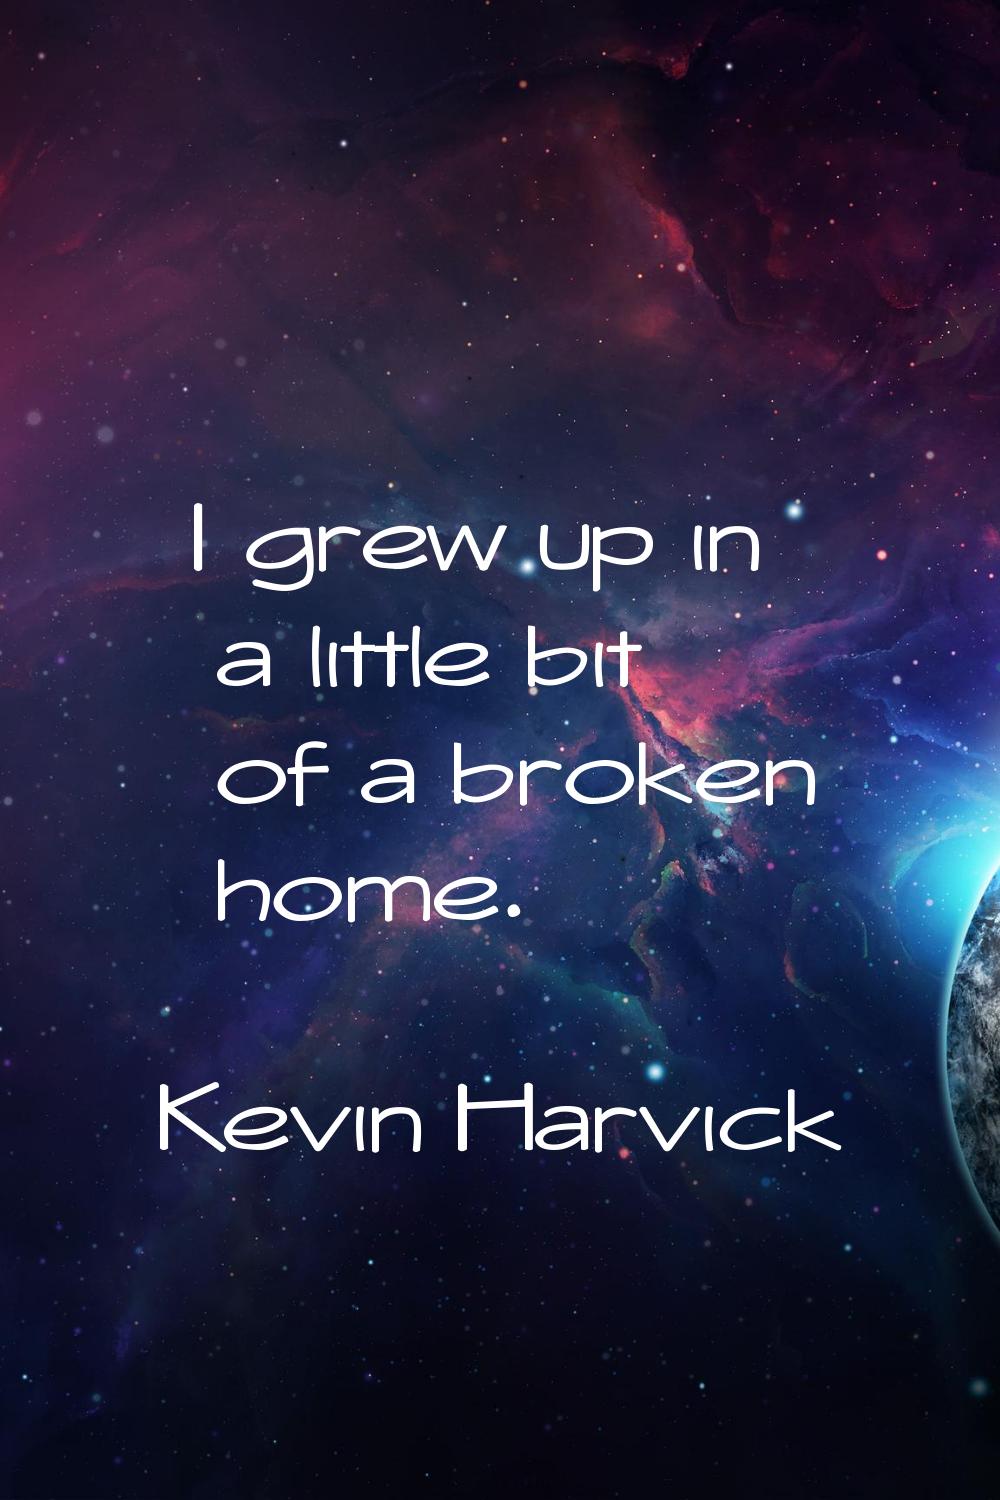 I grew up in a little bit of a broken home.